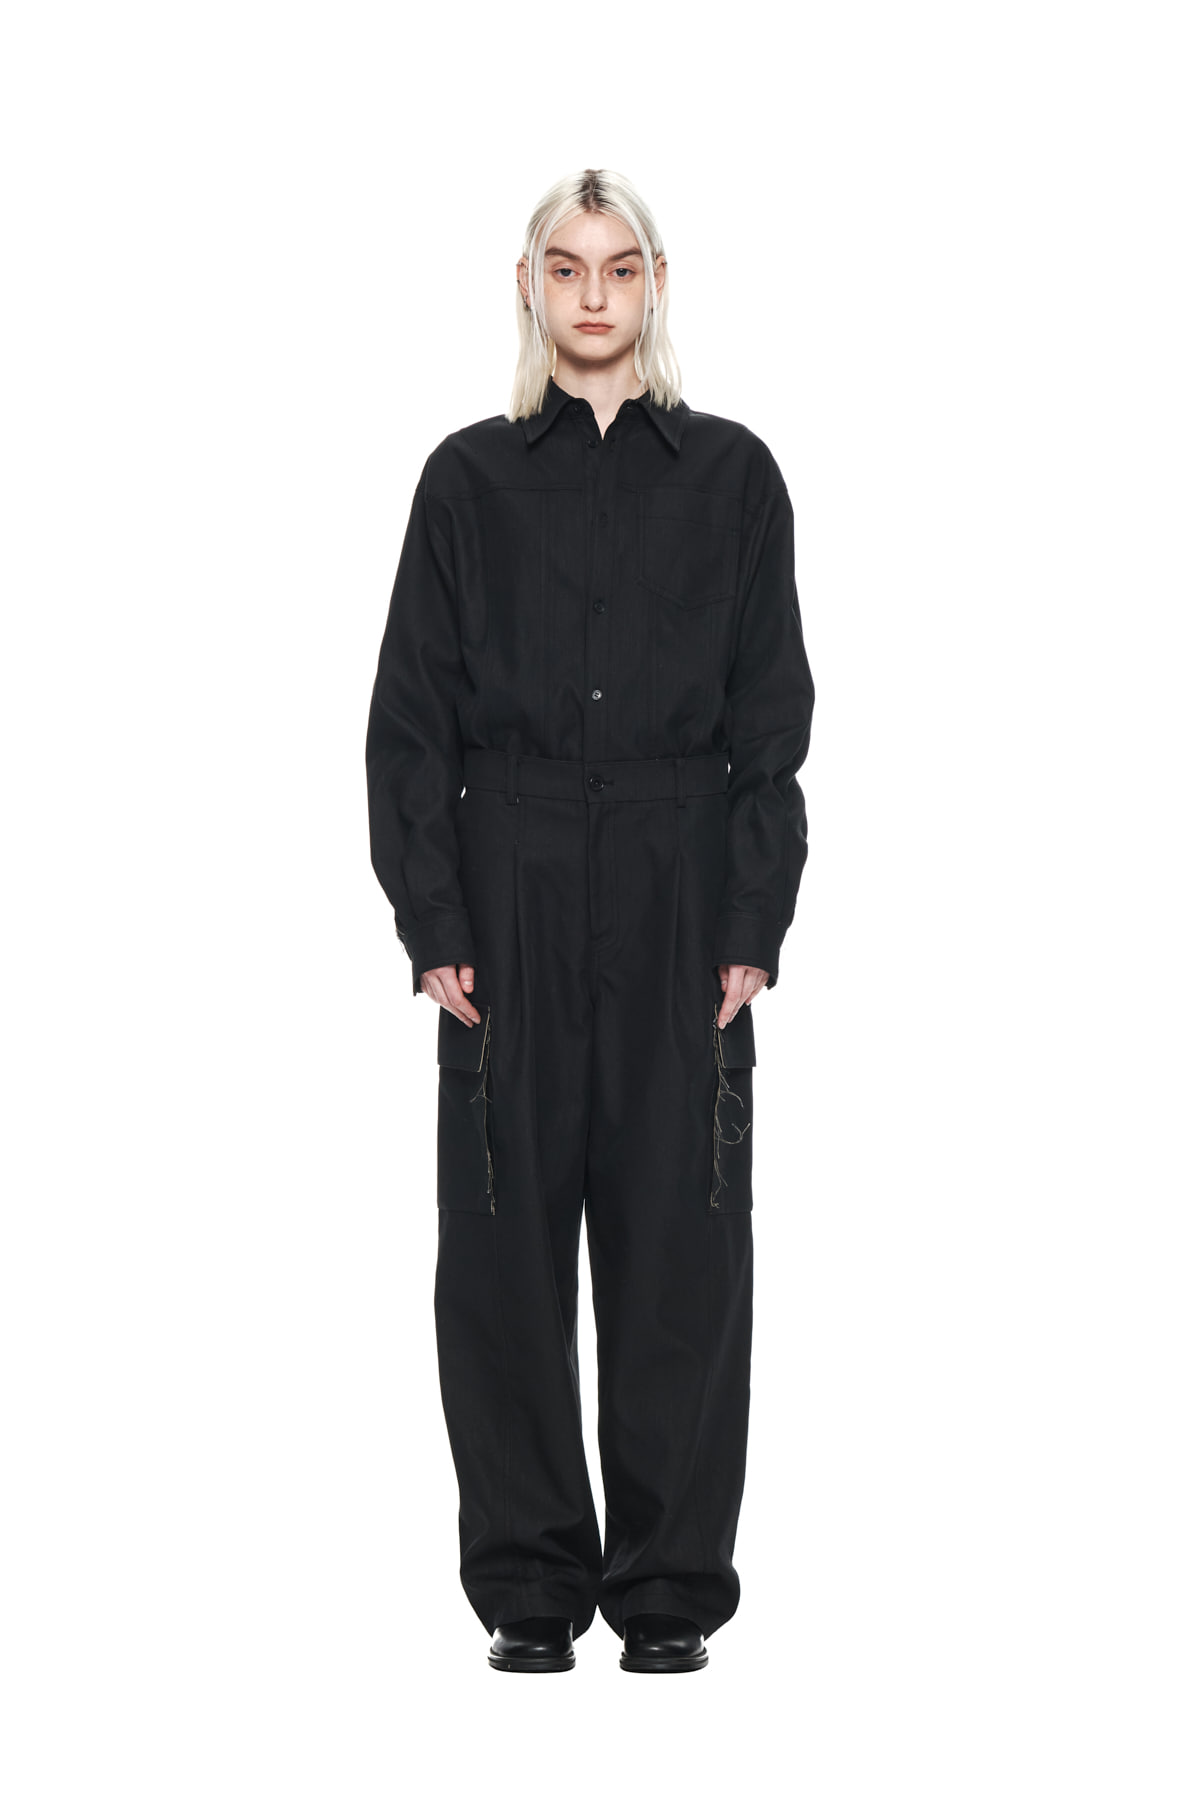 UTILITY BUTTON UP JUMPSUIT IN BLACK